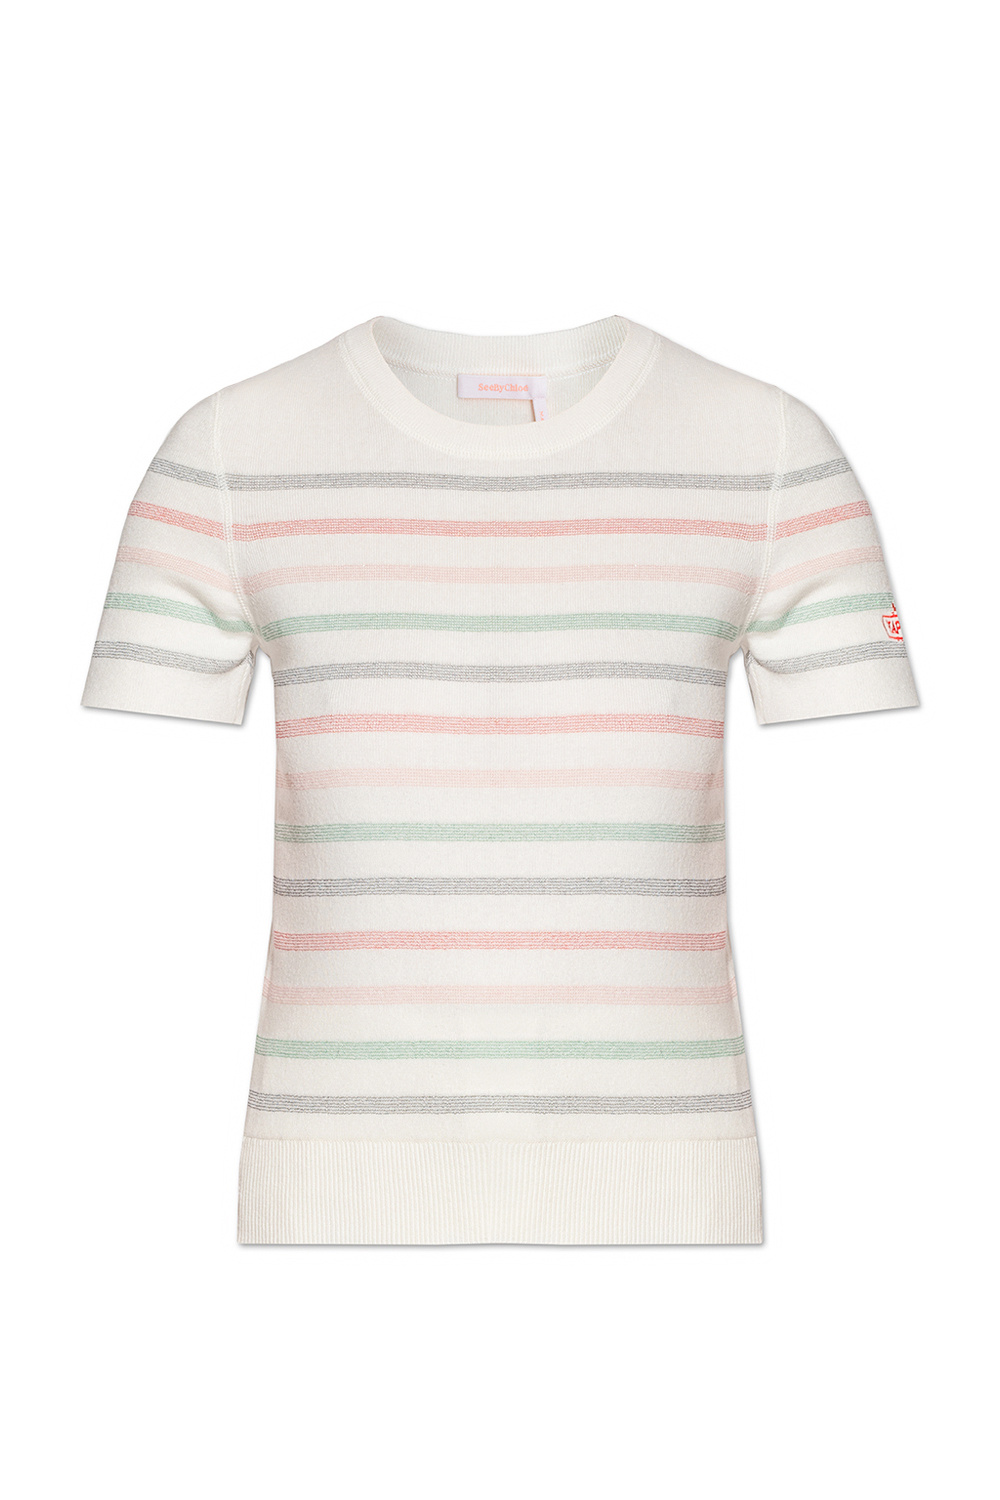 See By Chloé Short-sleeves top